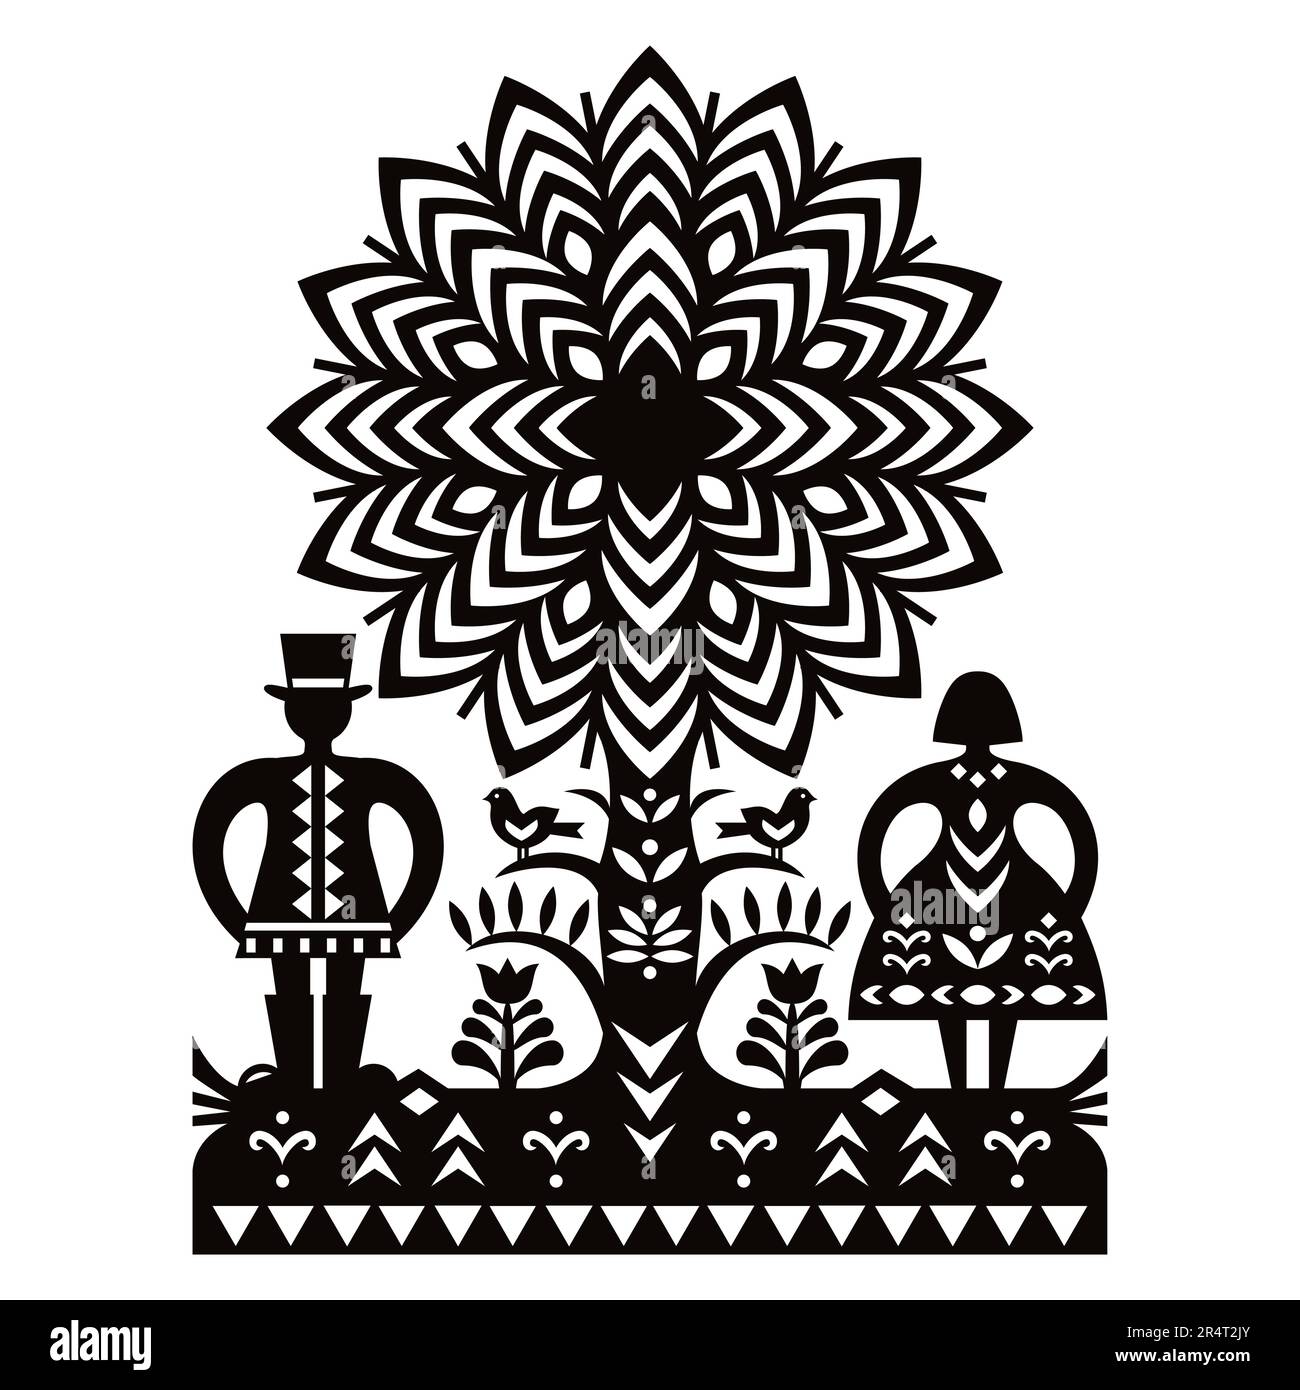 Polish folk art vector pattern with man in hat, woman and birds Kurpiowskie Leluje Wycinanki - Kurpie paper cut outs design in black and white Stock Vector